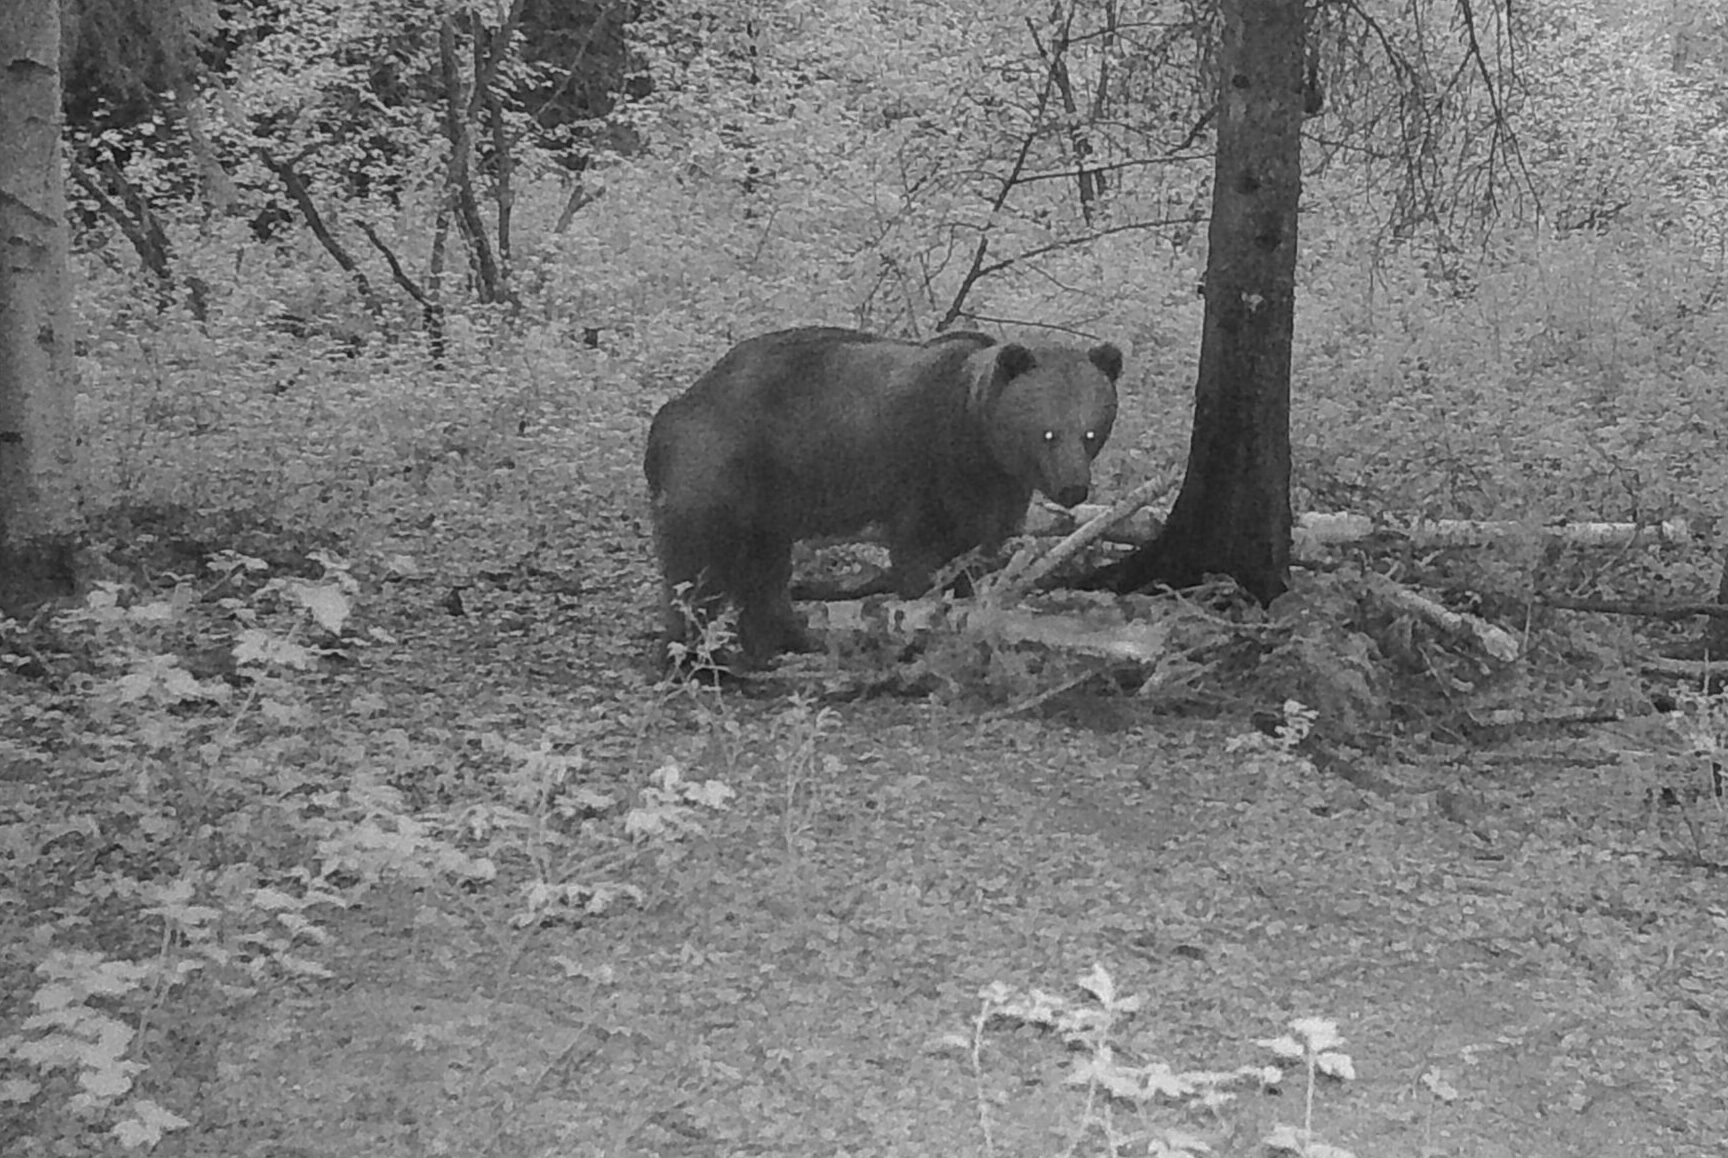 Grizzly bear trail cam photo